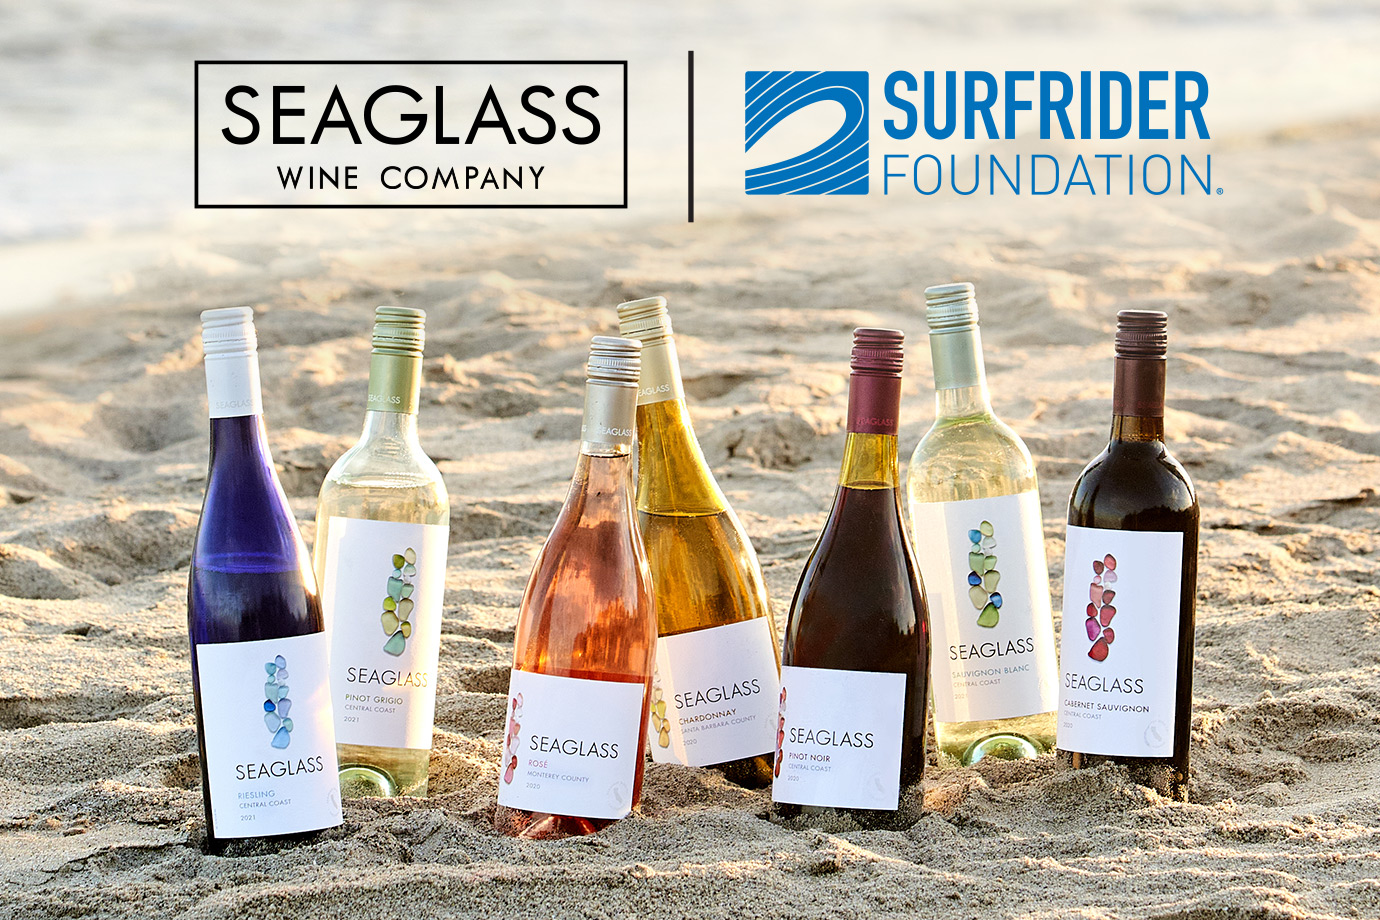 SEAGLASS wines and Surfrider Foundation